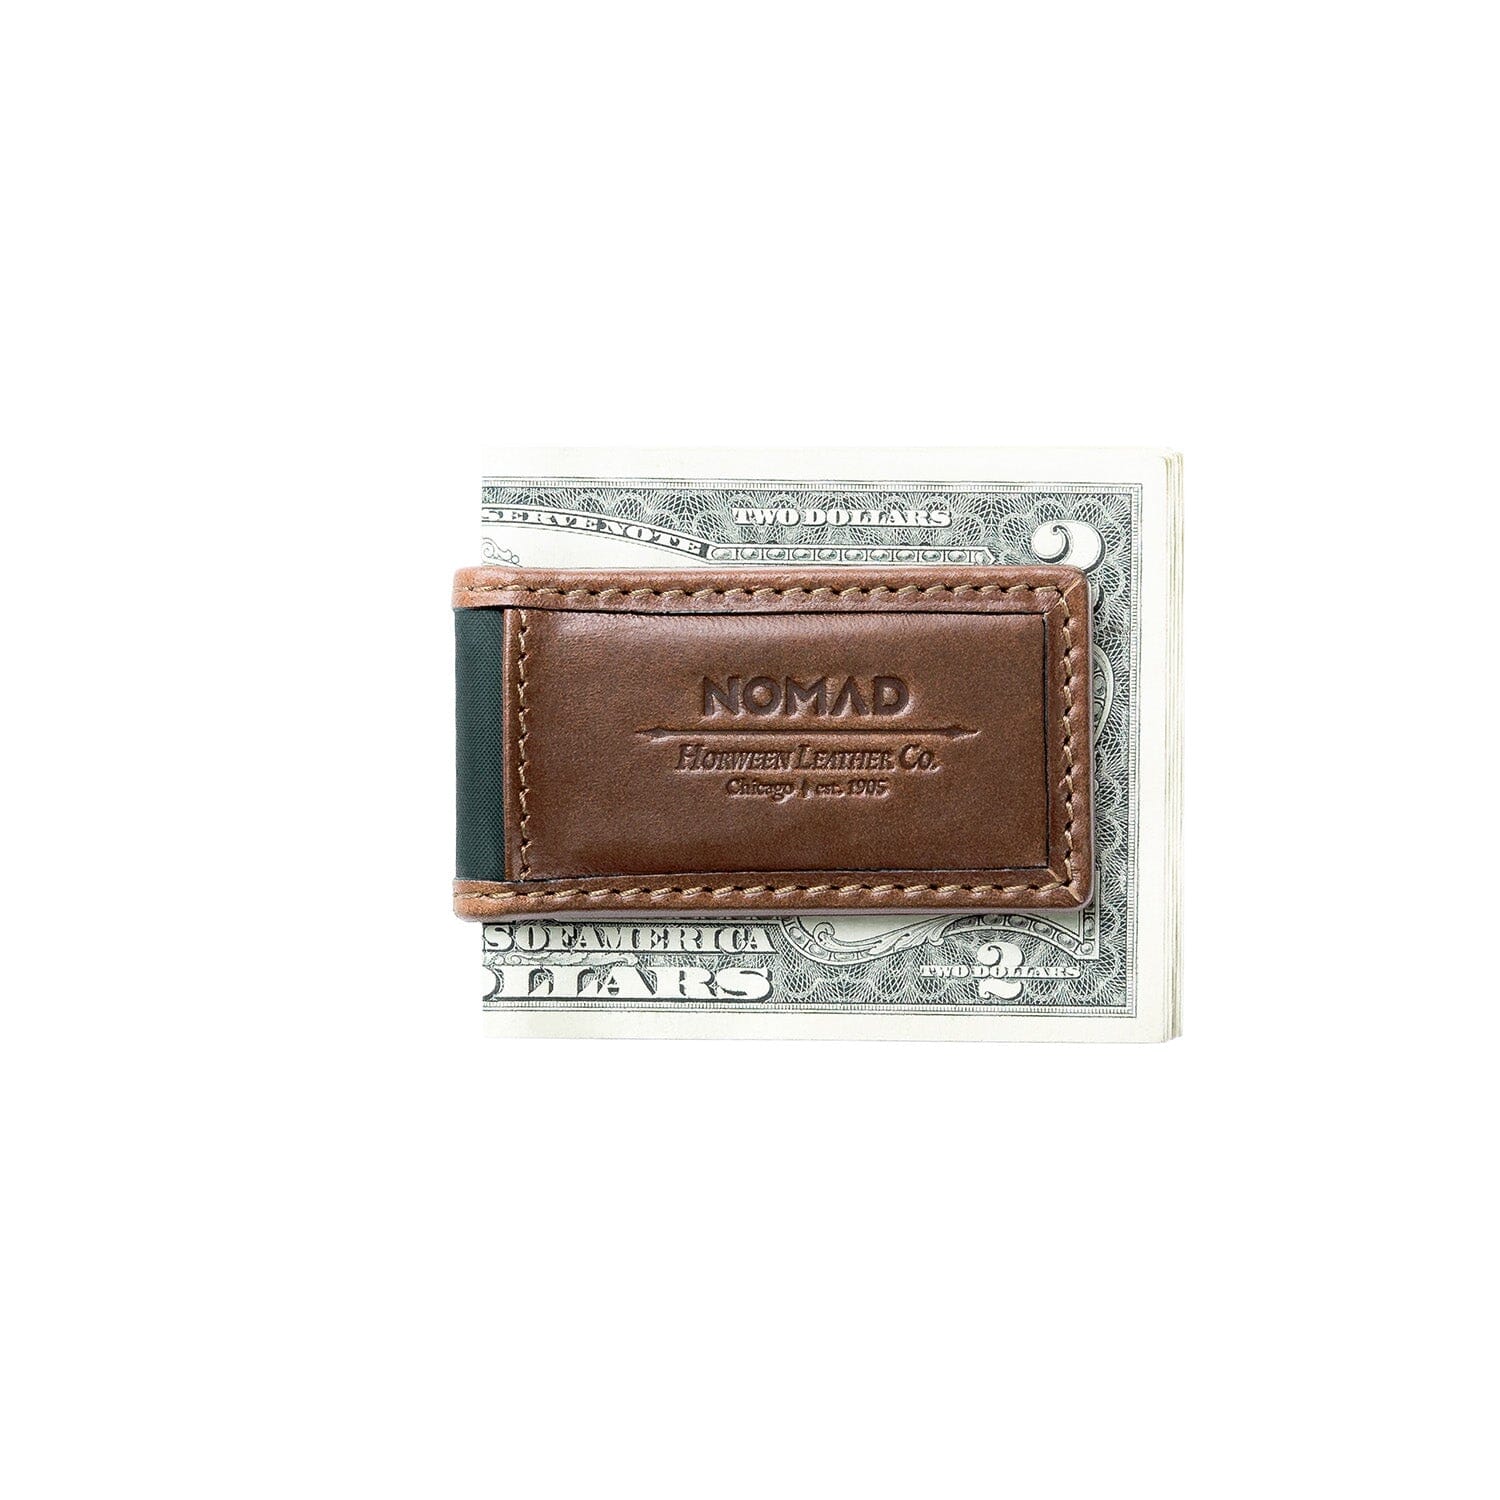 NOMAD Horween® Leather Money Clip Nomad 